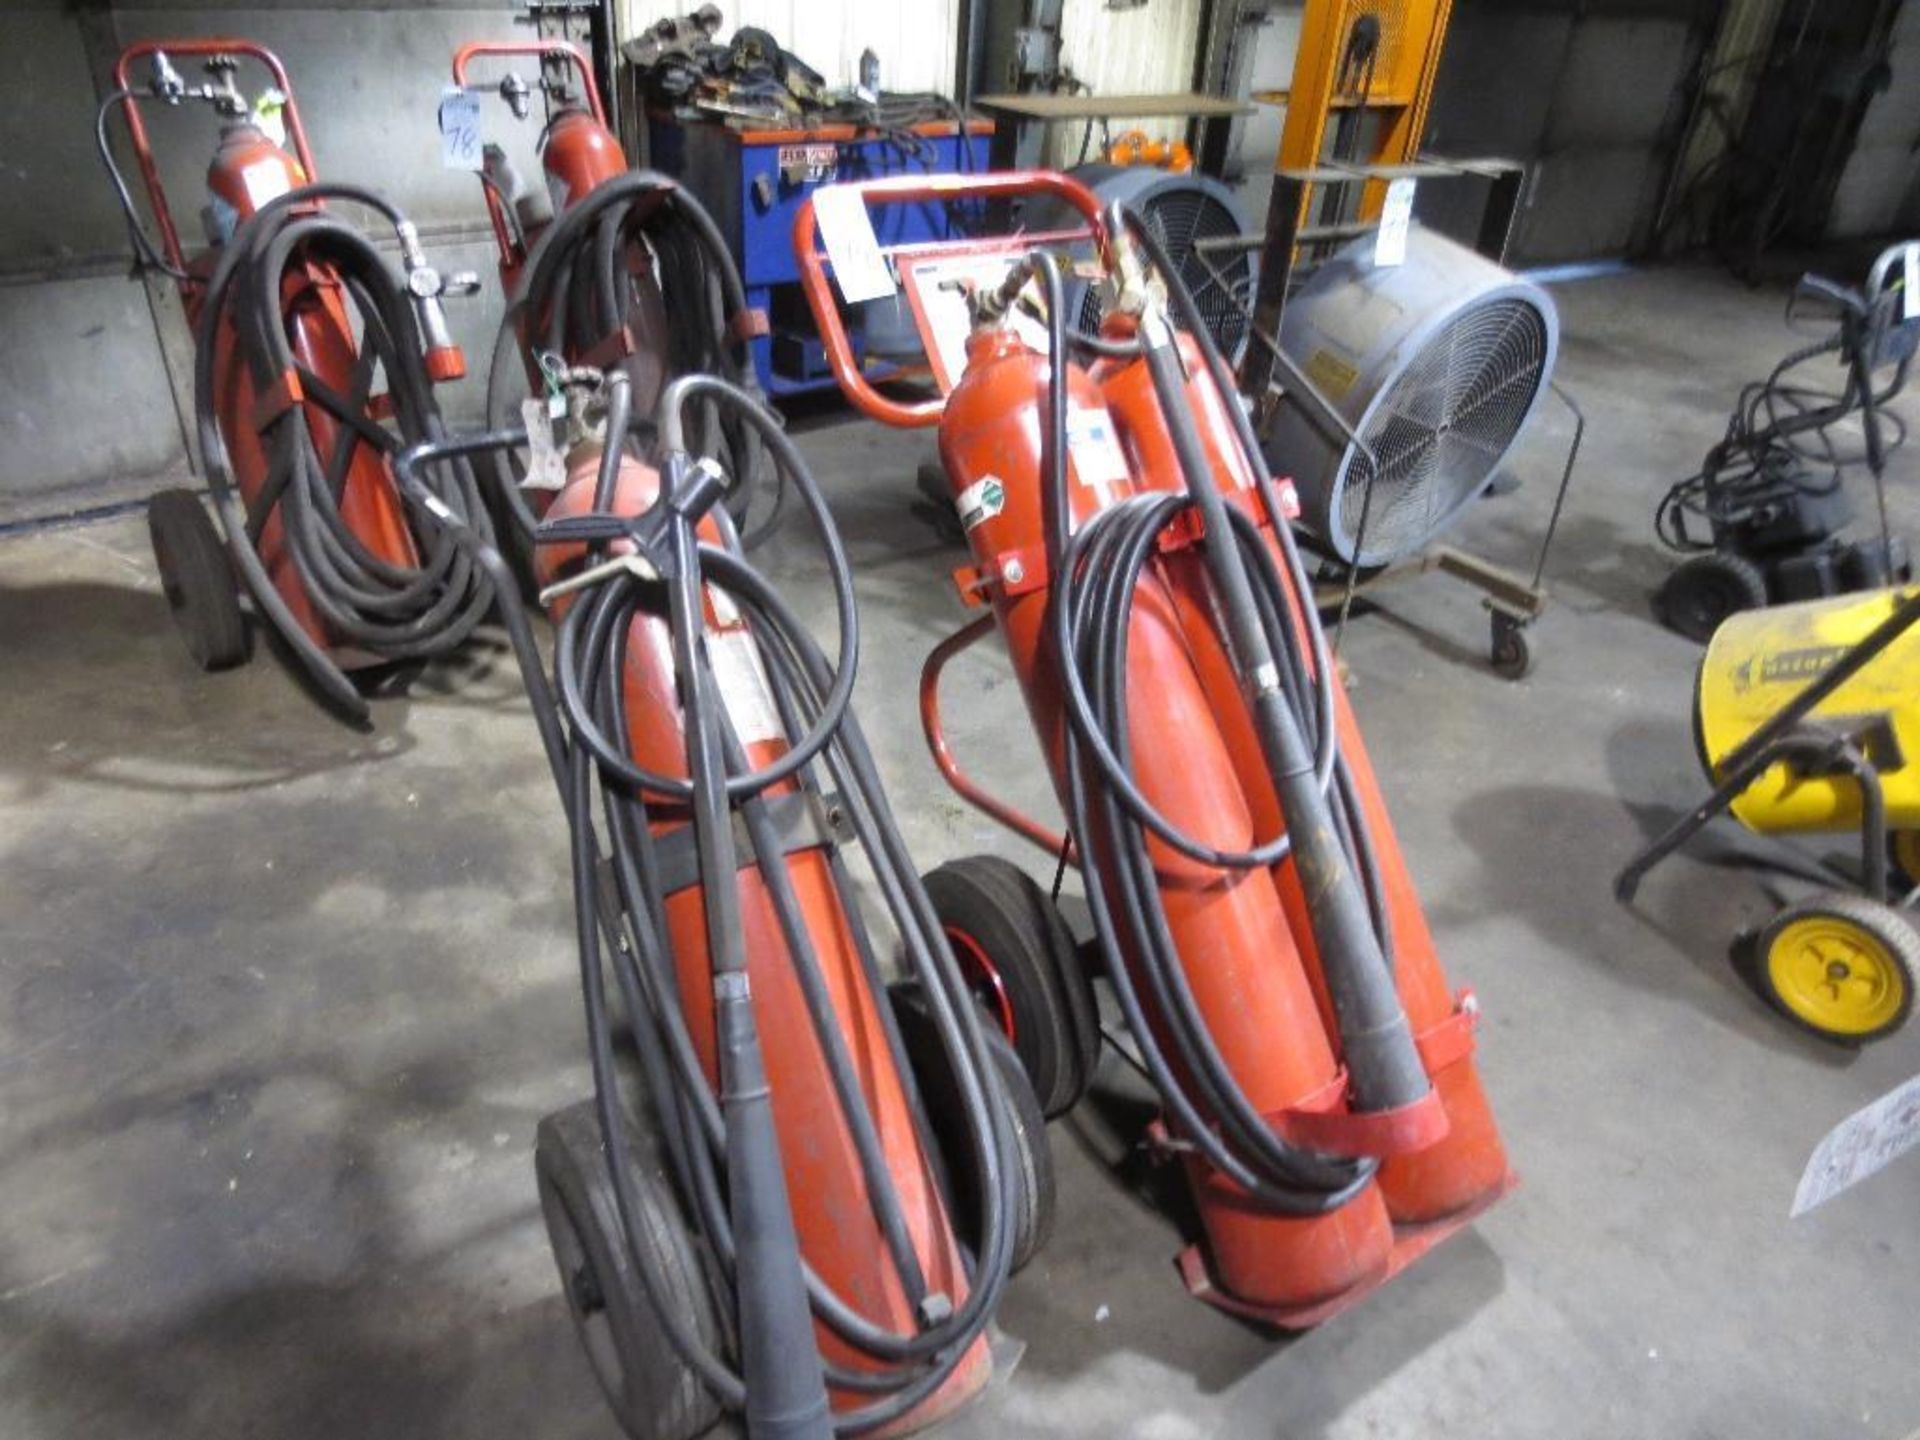 Two Extinguisher Carts, One with Two Carbon Dioxide Tanks and One with a Single Carbon Dioxide Tank